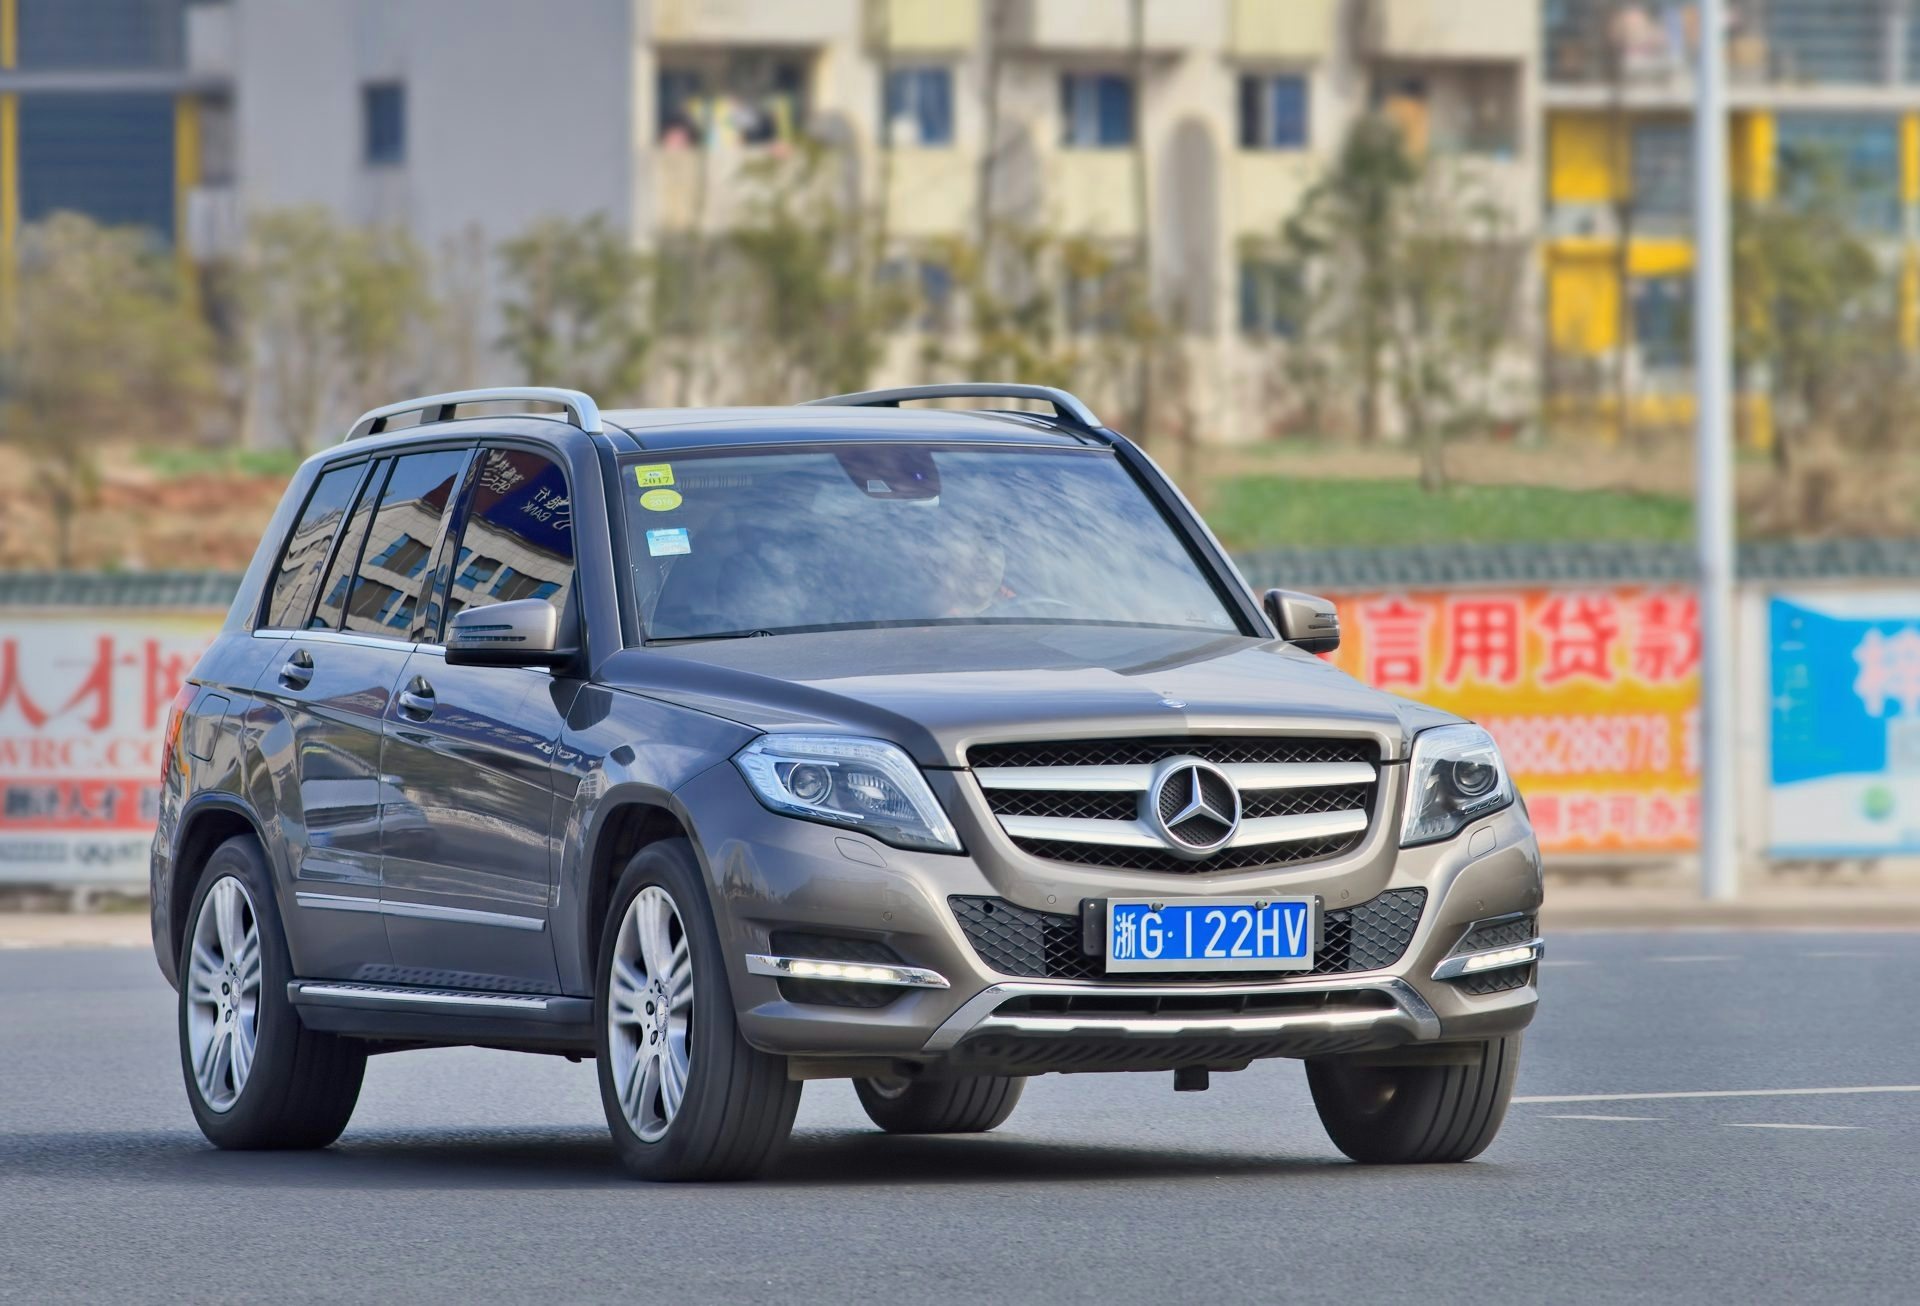 A Chinese drive from Zhejiang province is driving Mercedes-Benz M Class on the street. (Shutterstock)